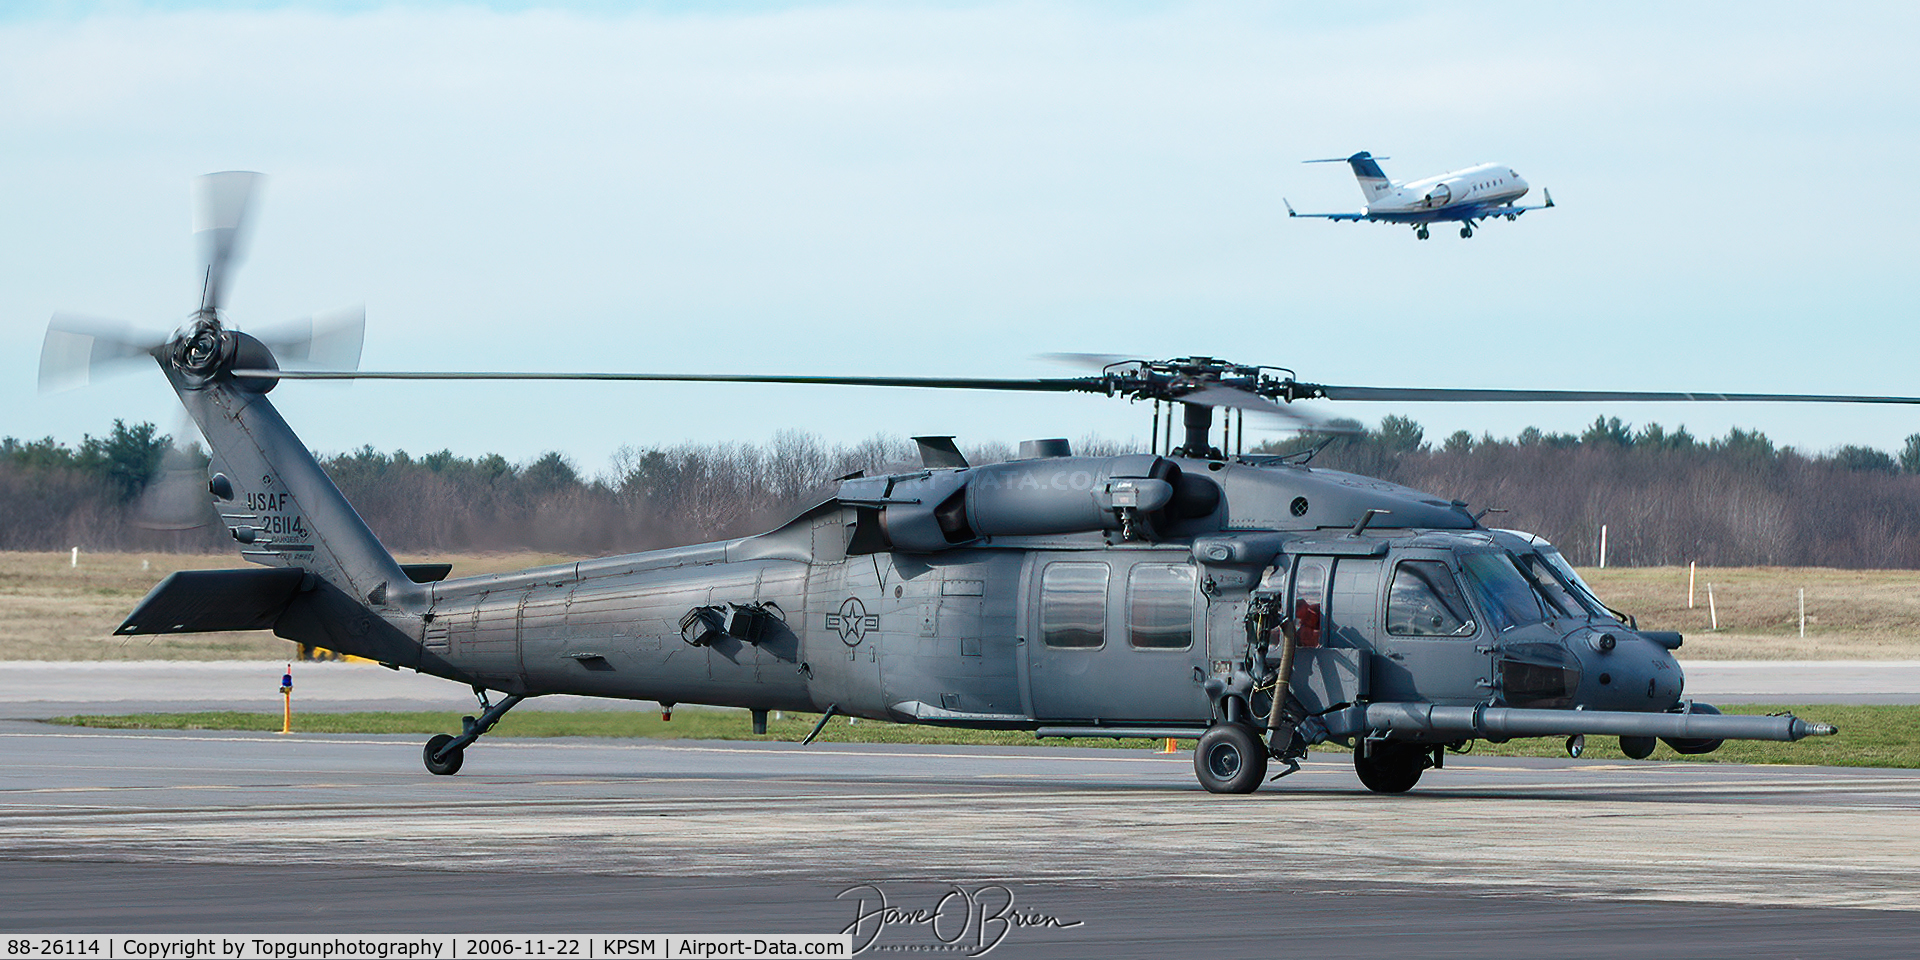 88-26114, 1986 Sikorsky HH-60G Pave Hawk C/N 70.1311, taxiing to the ramp to refuel and grab lunch.